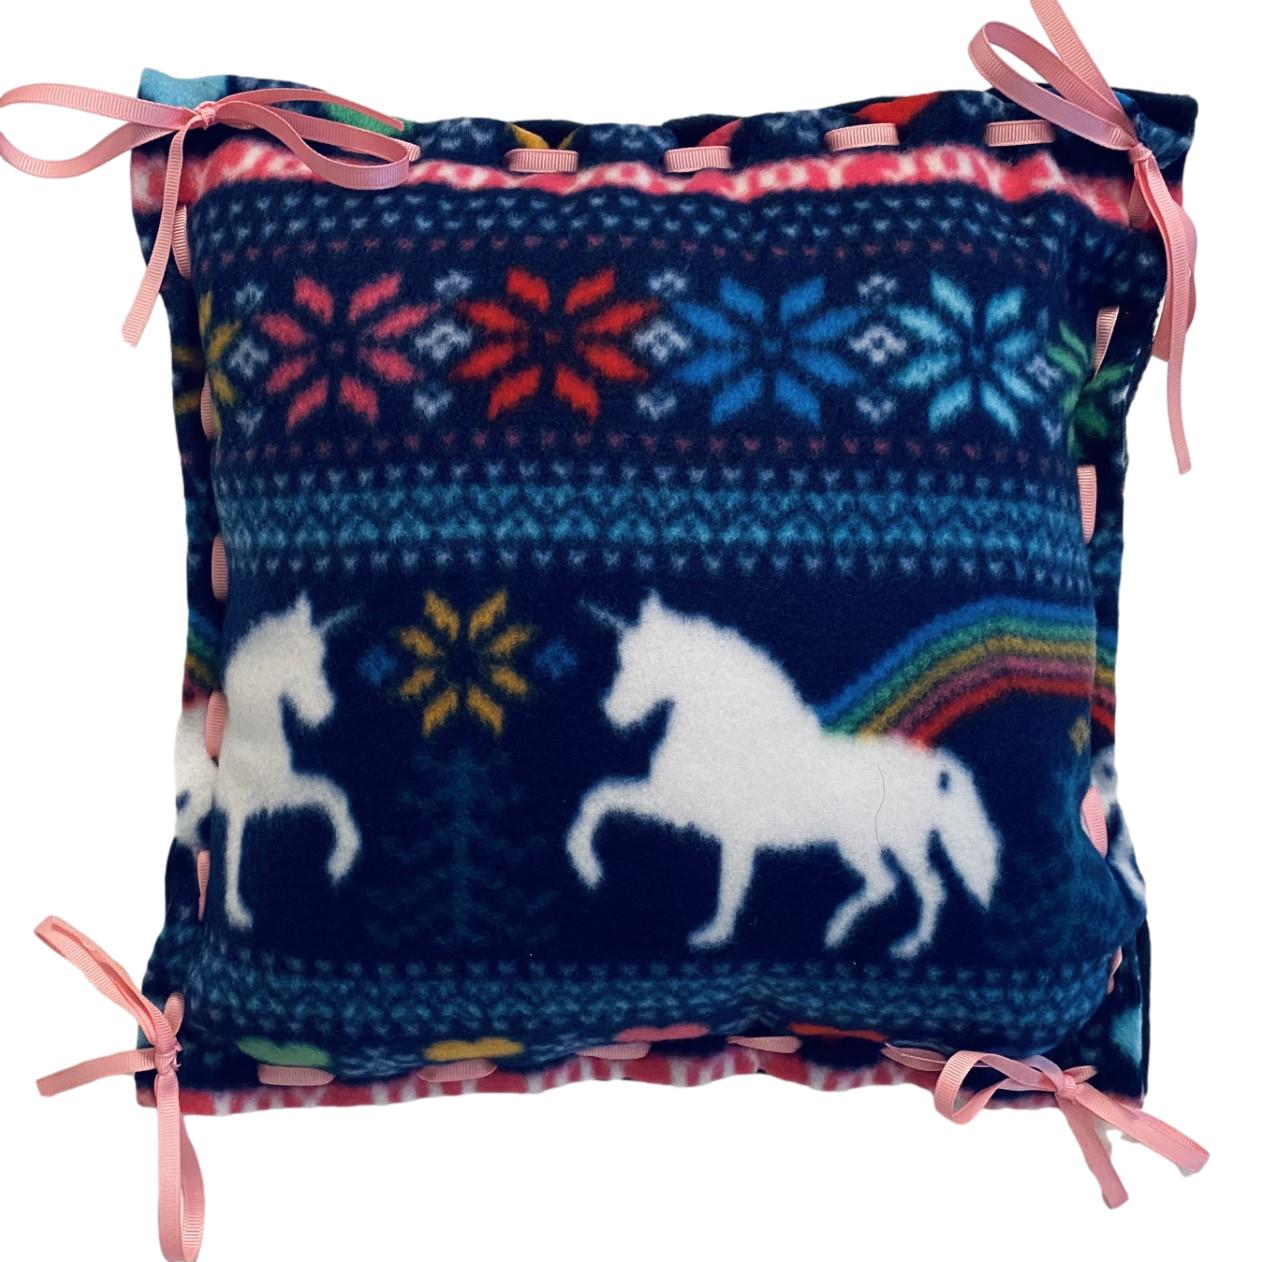 Fleece Pillow with Unicorns and Rainbow Pattern in Navy, White, Pink, Green laced with pink ribbon